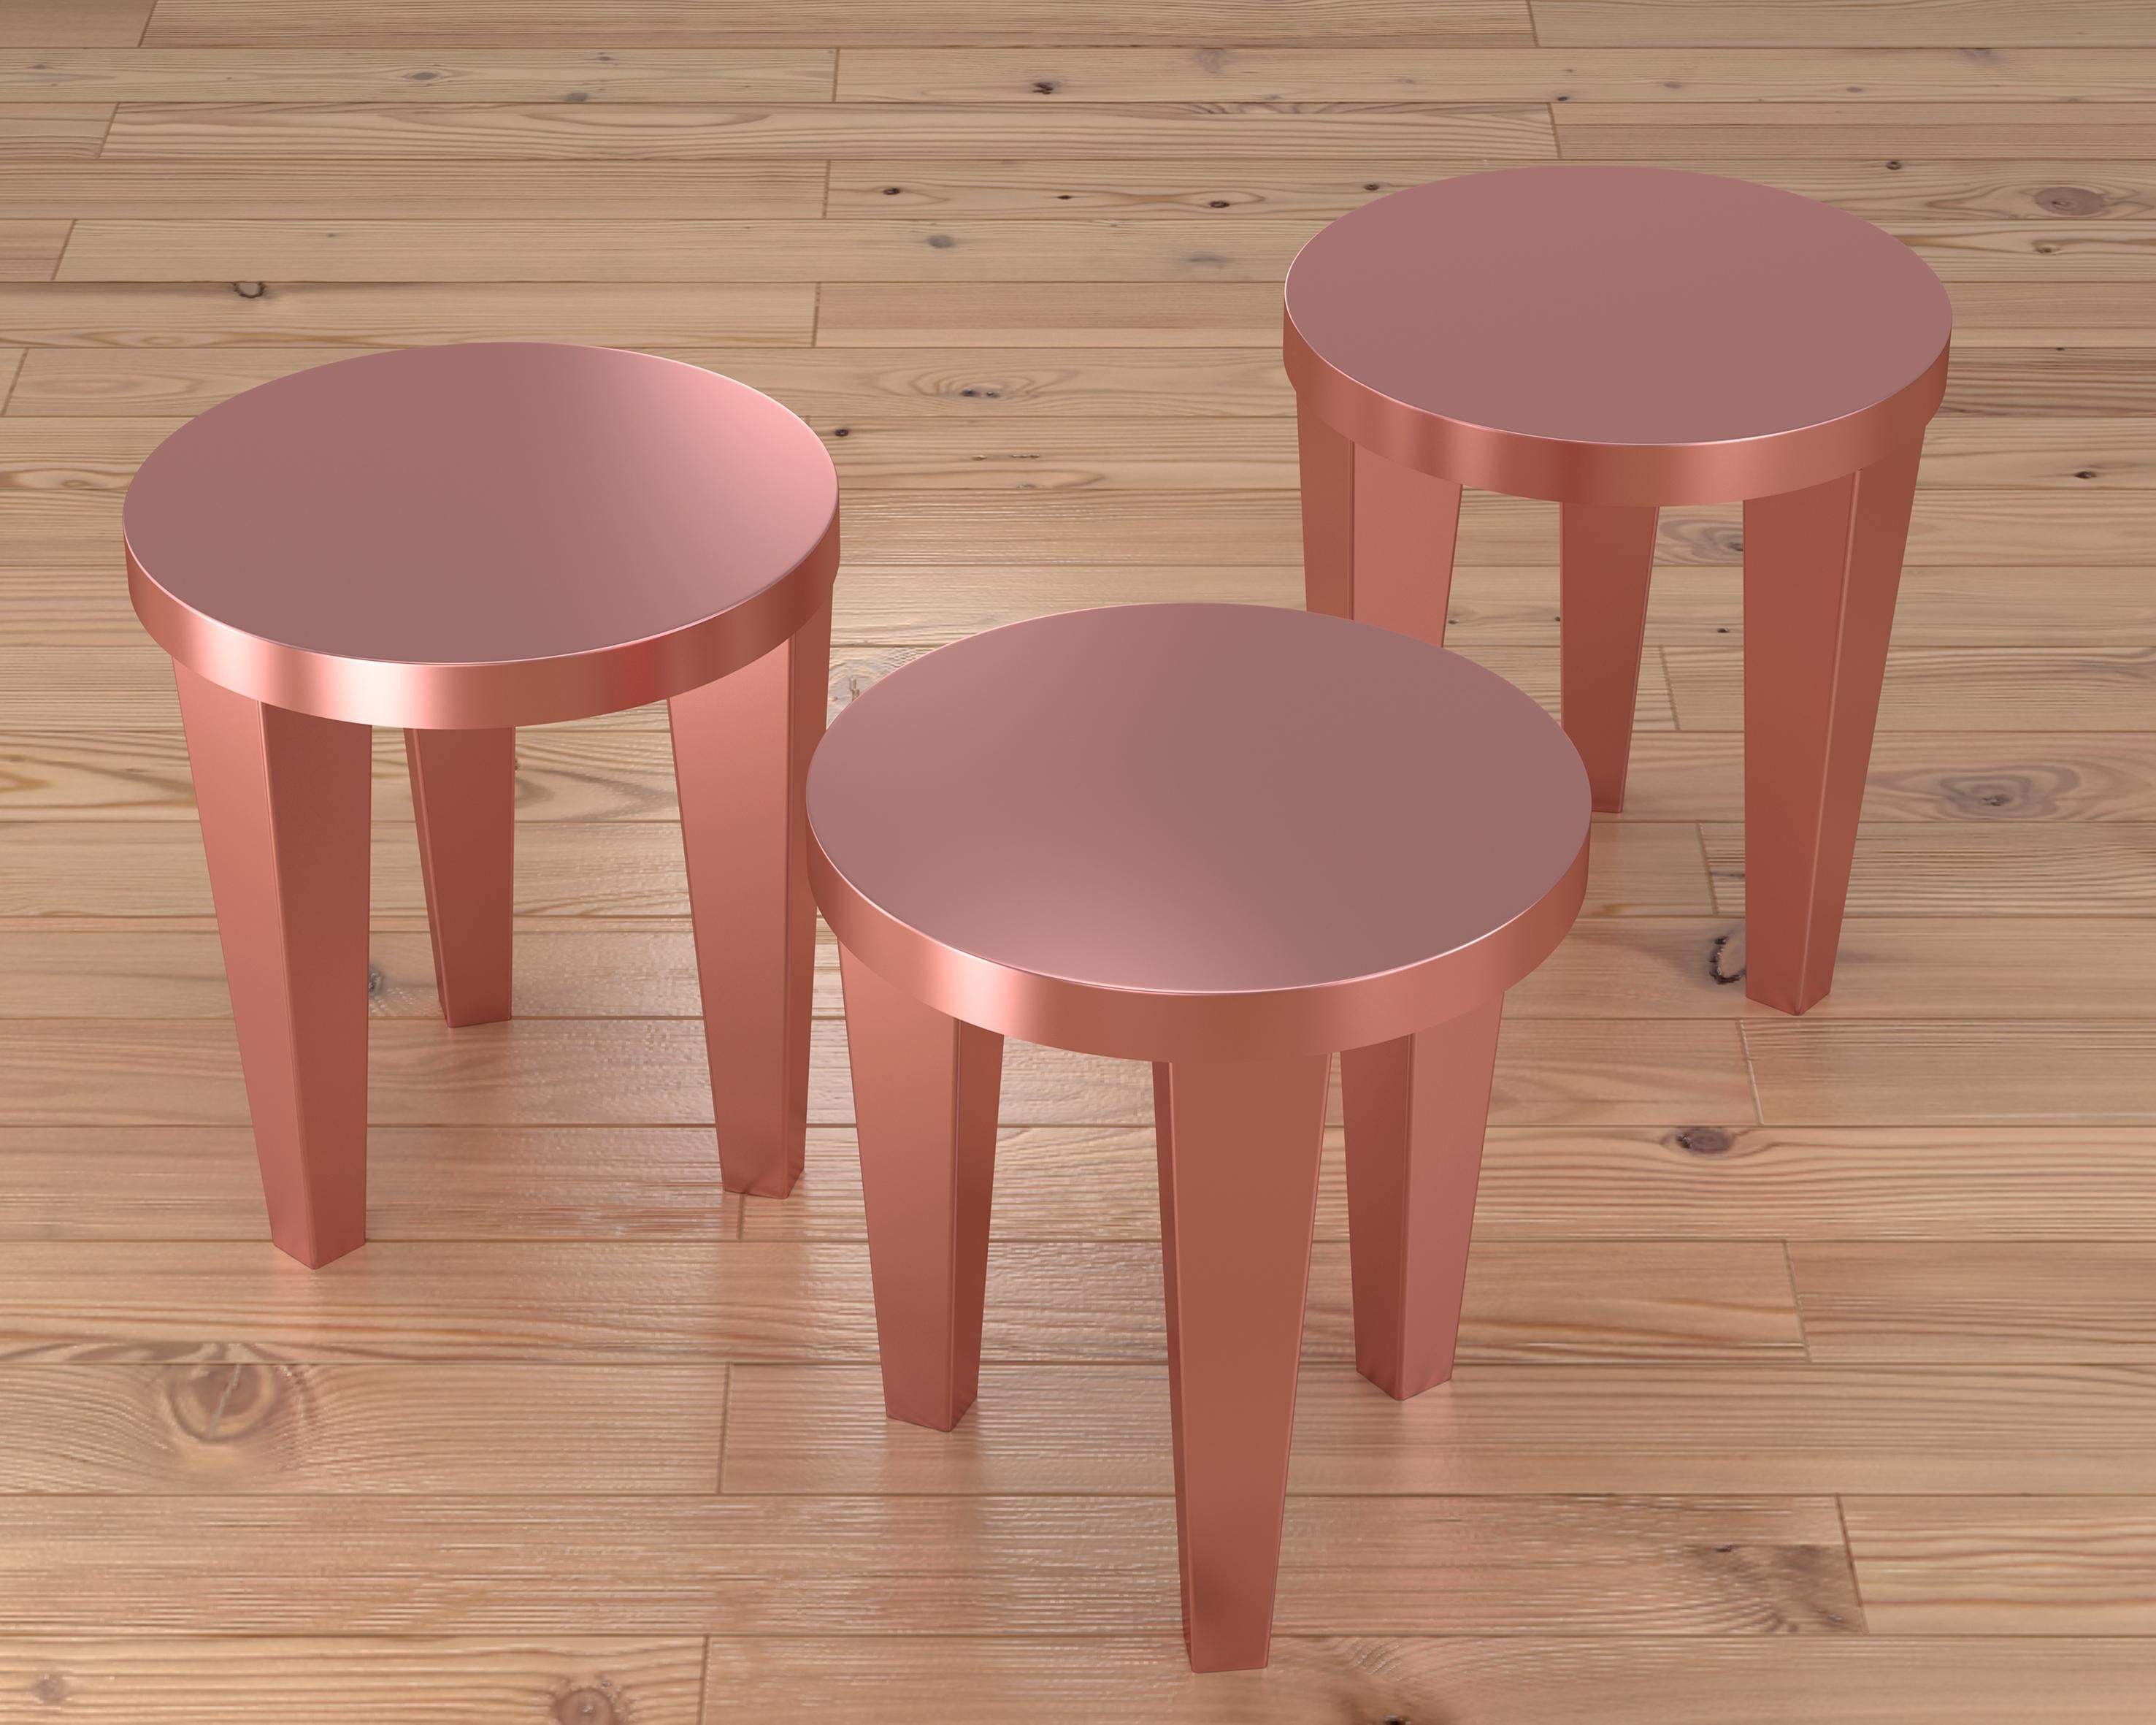 Italian Contemporary Stool Gold Bob by Chapel Petrassi For Sale